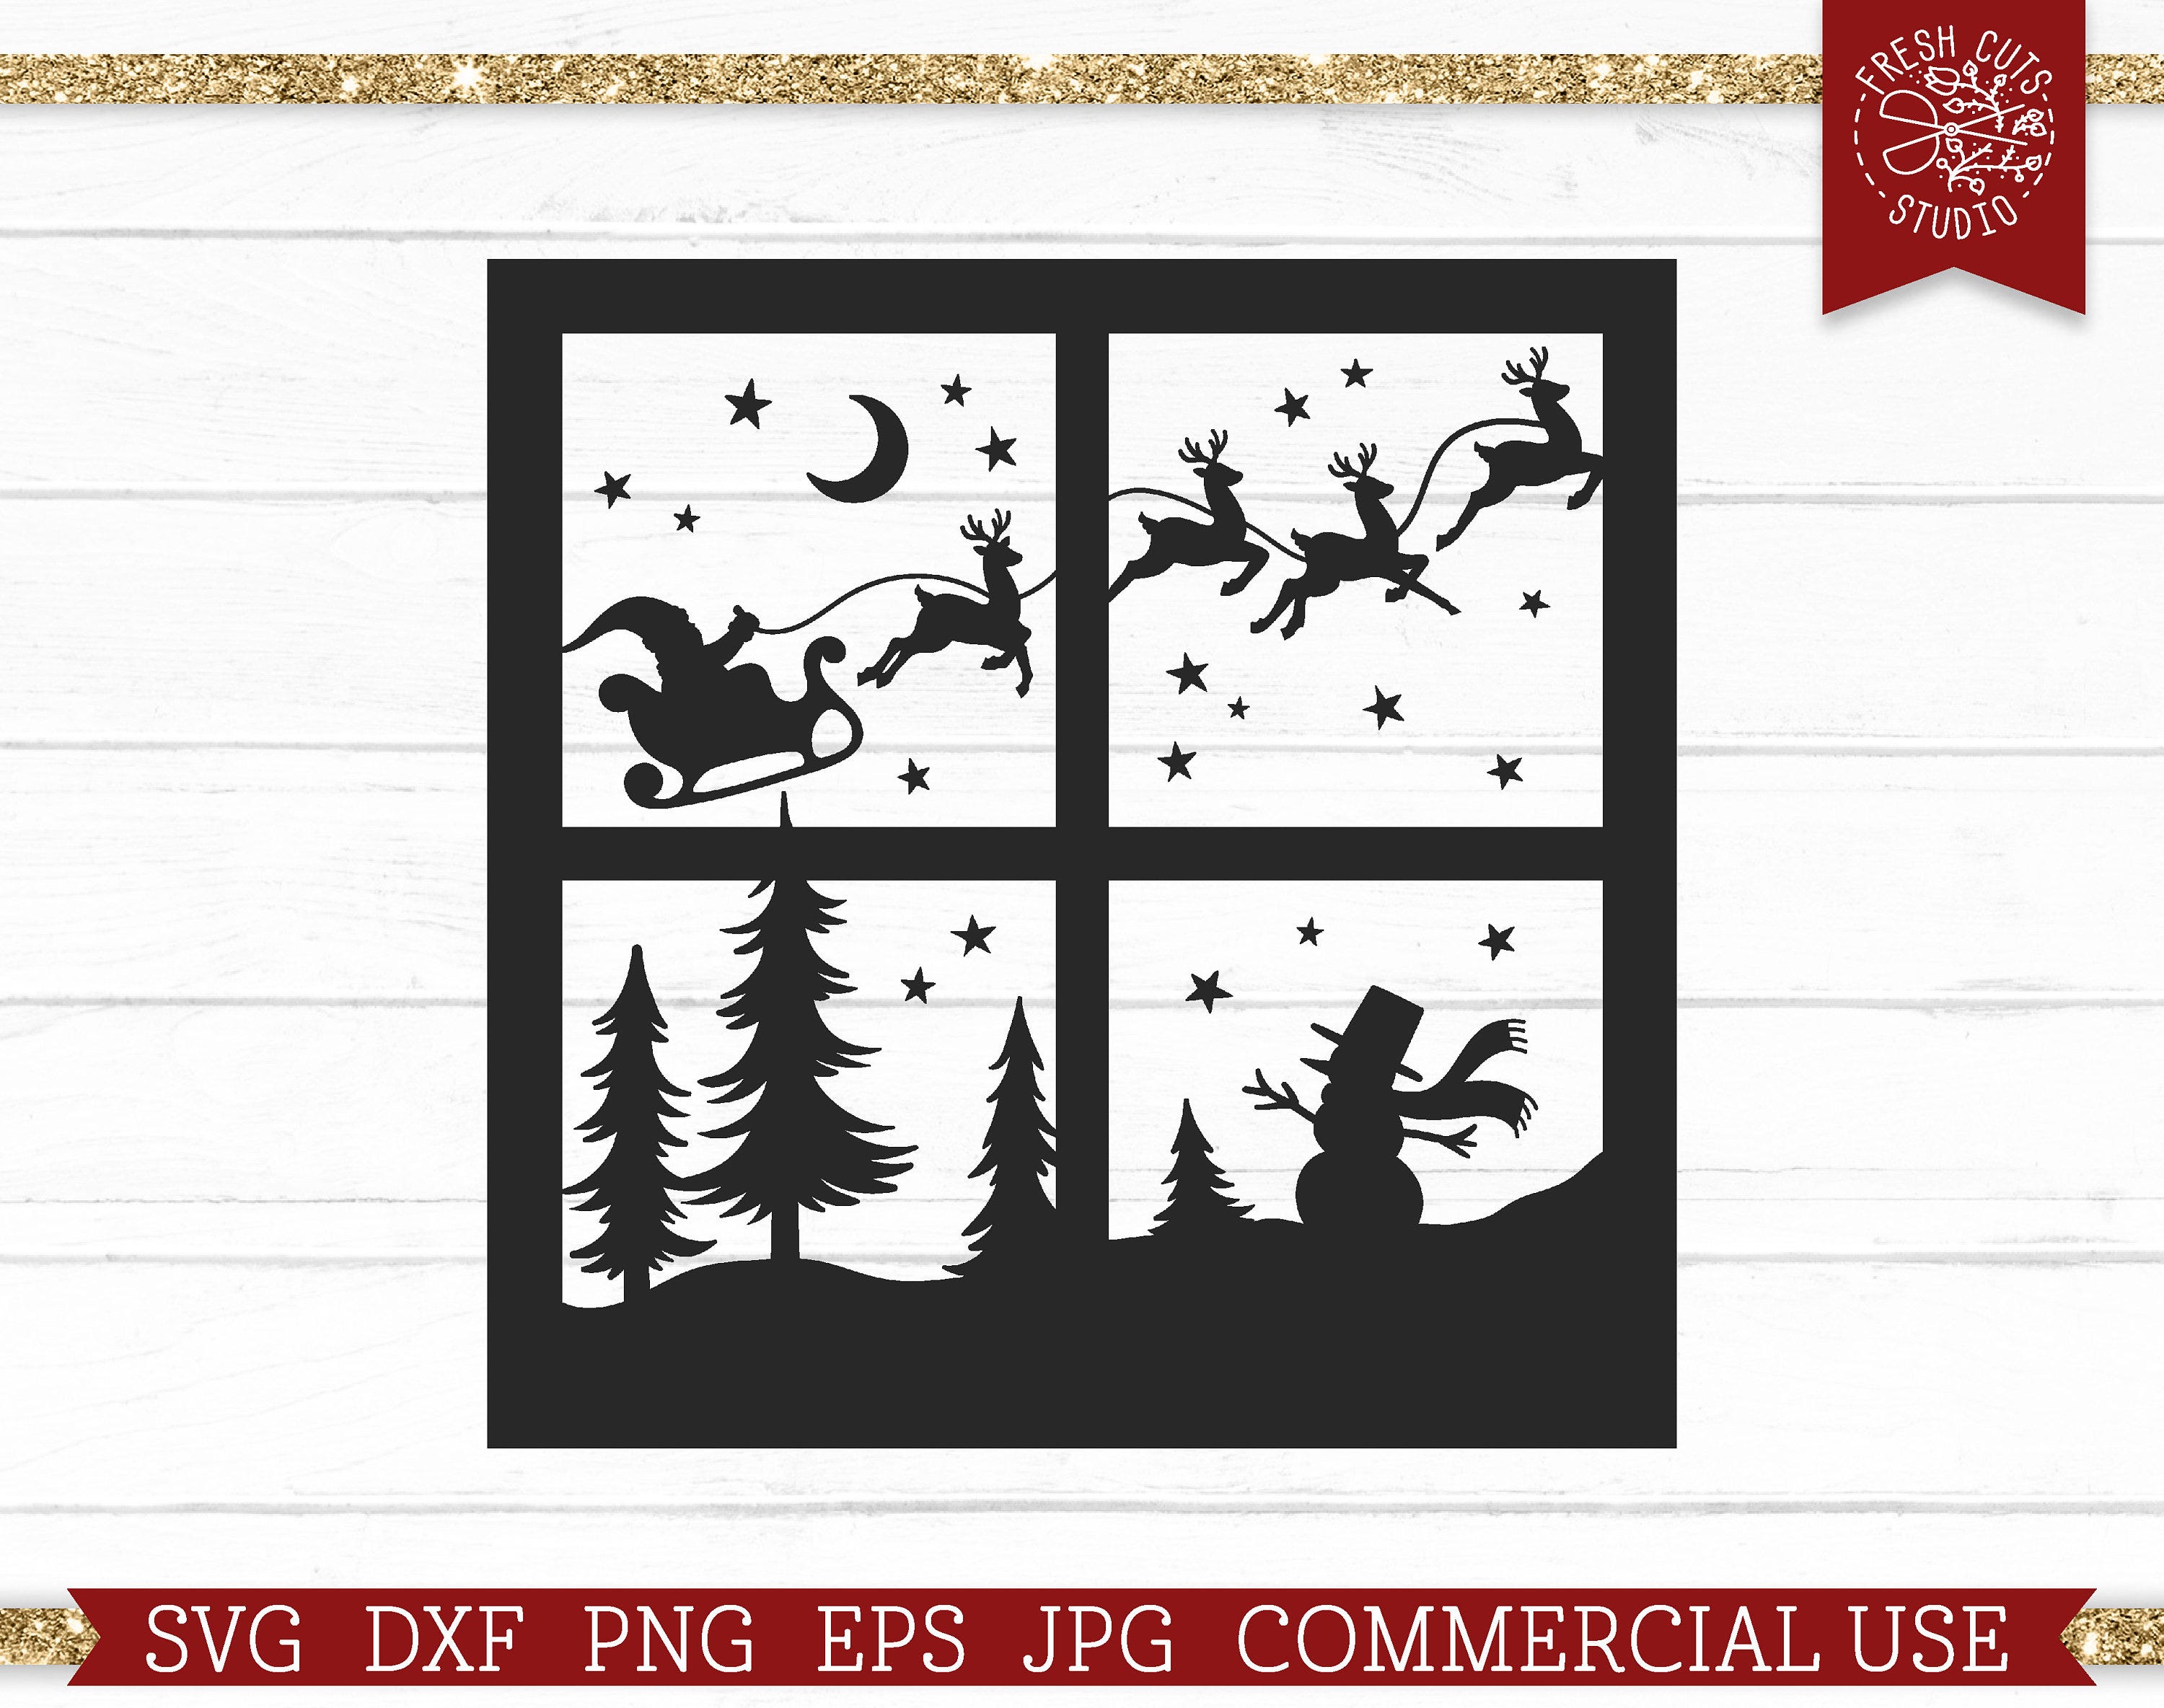 Santa Claus with Reindeer SVG Winter Scene Cut File for Cricut, Window Snowy Snowman SVG, Christmas Eve Scene, Snowing Window Panes Png Dxf